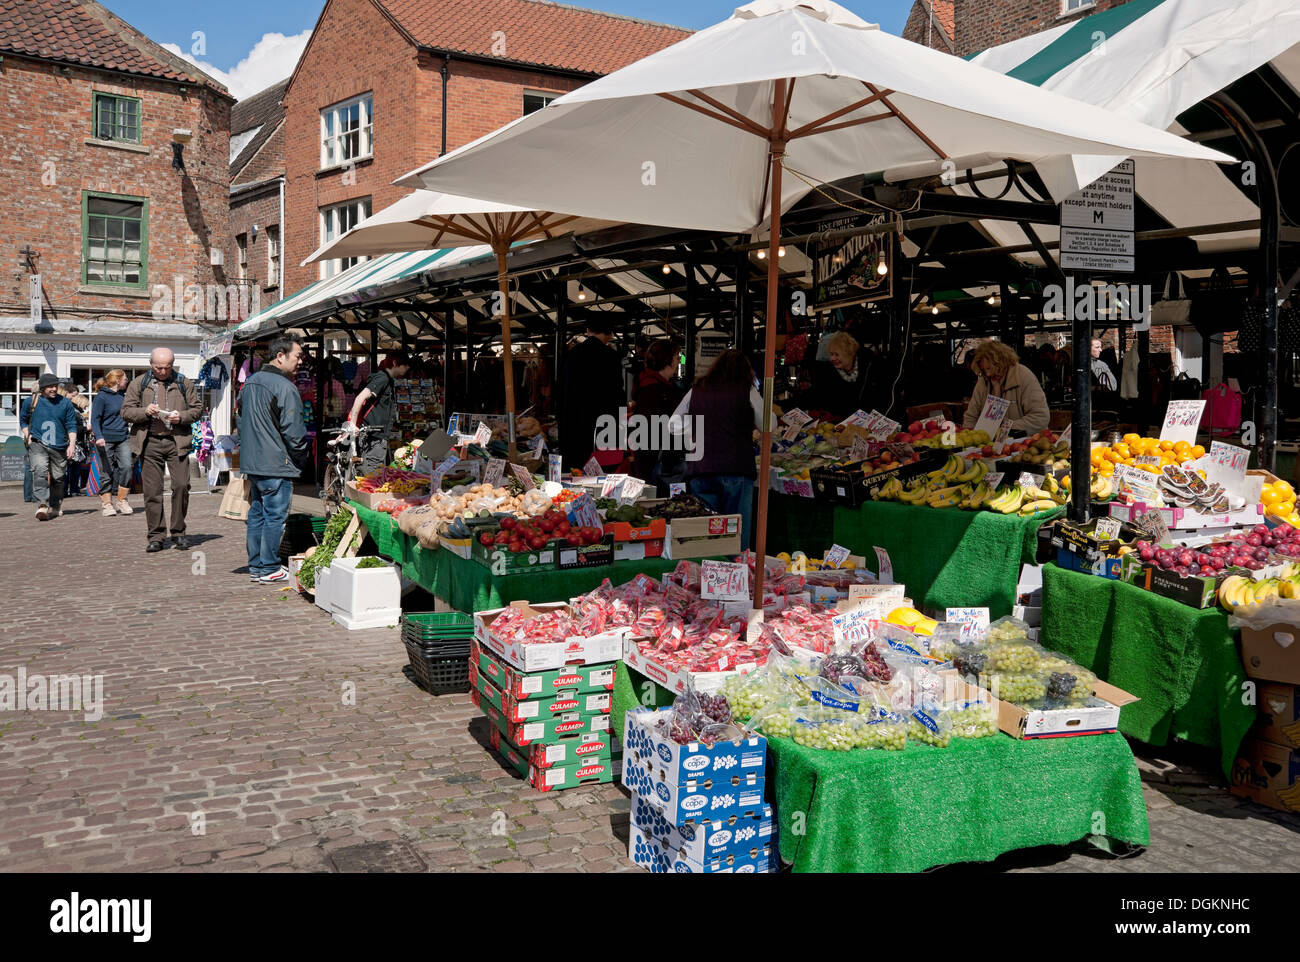 Fresh fruit and vegetables for sale at an outdoor market stall. Stock Photo